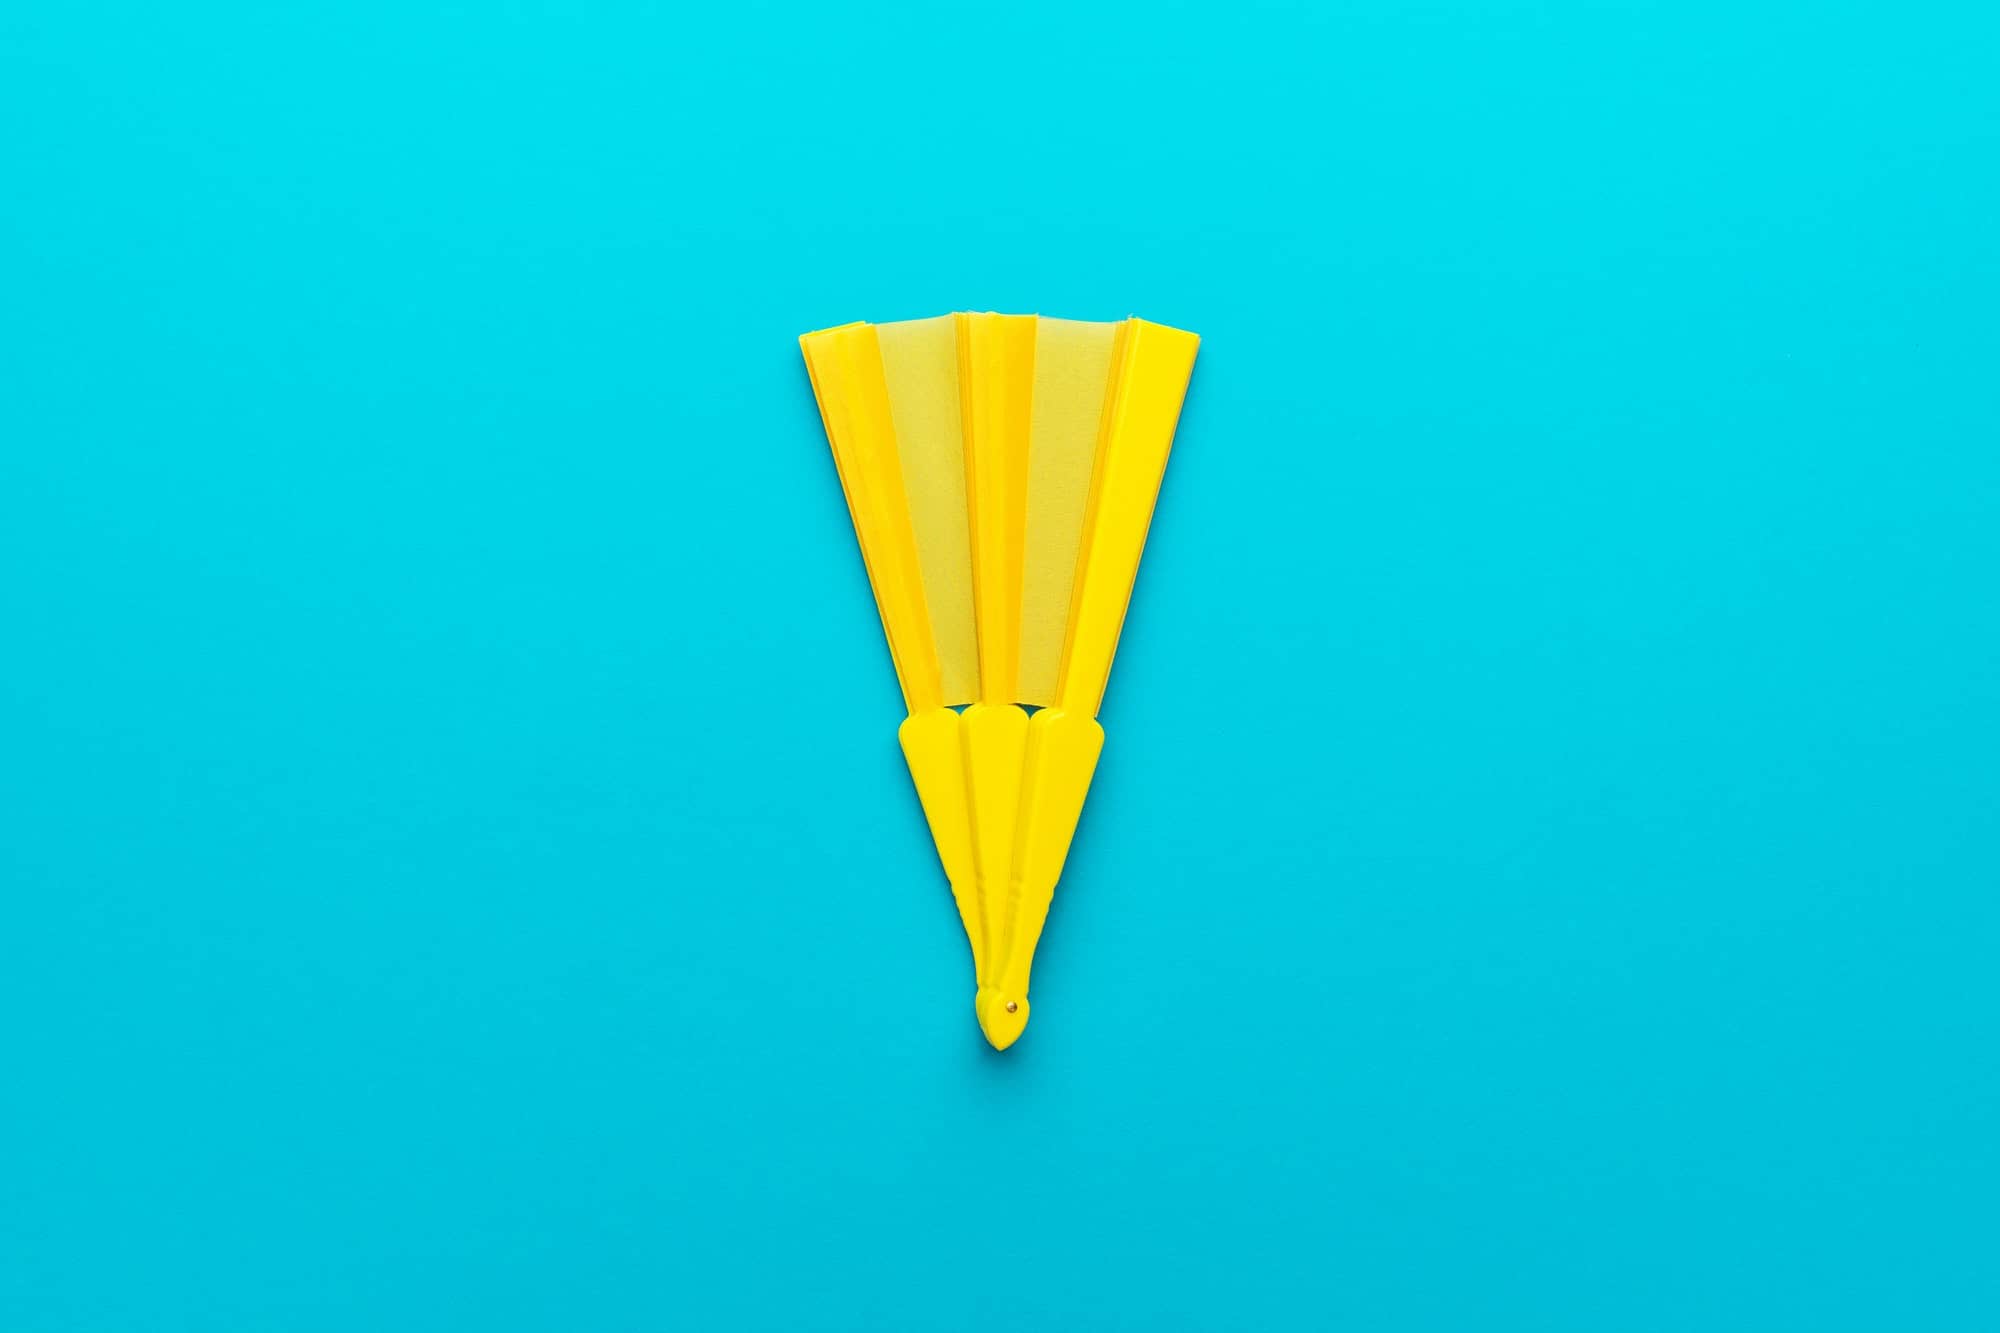 Minimalist Photo Of Yellow Hand Fan On Turquoise Blue Background With Copy Space